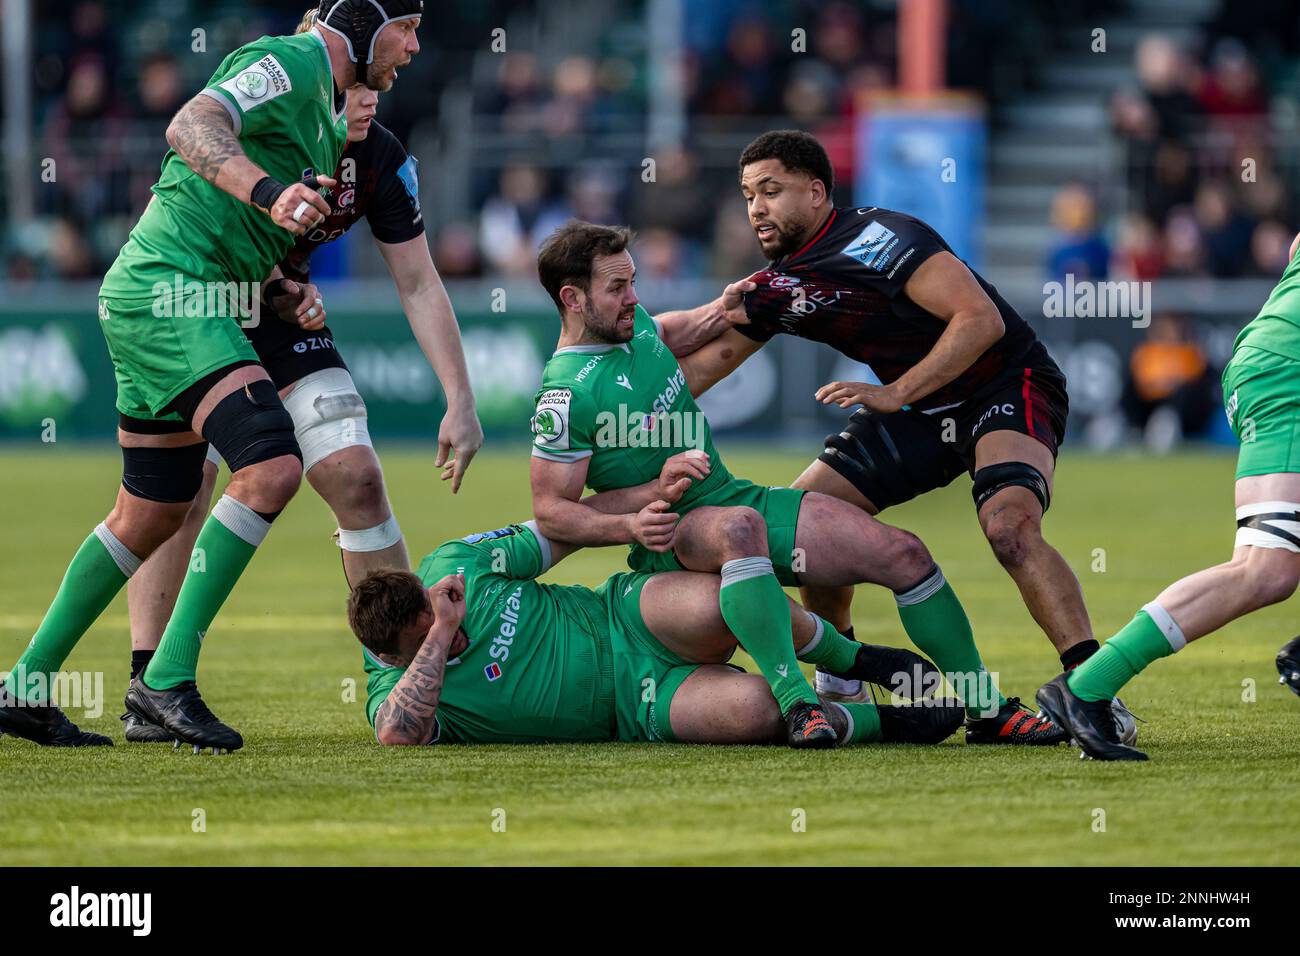 LONDON, UNITED KINGDOM. 25th, Feb 2023. Michael Young Newcastle Falcons (Capt.) (centre) is tackled during Gallagher Premiership Rugby Match between Saracens vs Newcastle Falcons at StoneX Stadium on Saturday, 25 February 2023. LONDON ENGLAND.  Credit: Taka G Wu/Alamy Live News Stock Photo